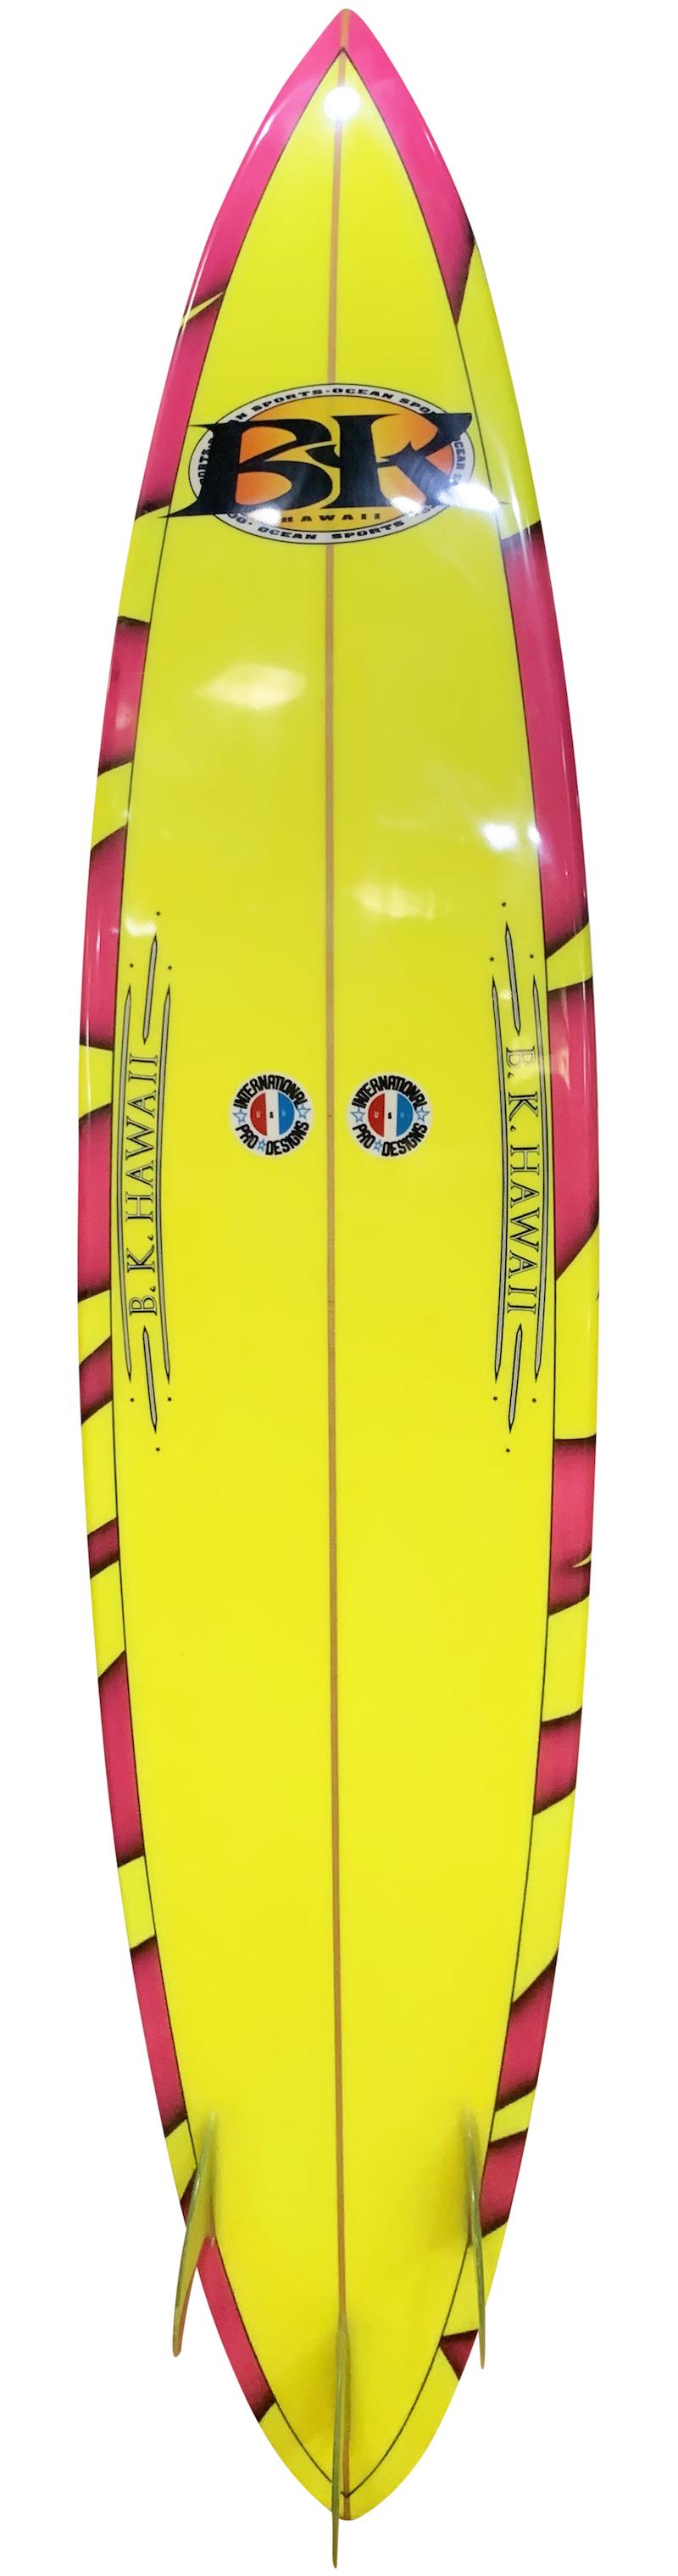 Early 1990s vintage BK Hawaii big wave gun surfboard shaped by Barry Kanaiaupuni in the early 1990s. Featuring a vibrant pink tiger stripe airbrush design and thruster fin setup. Restored to original condition.

Barry Kanaiaupuni is best known for